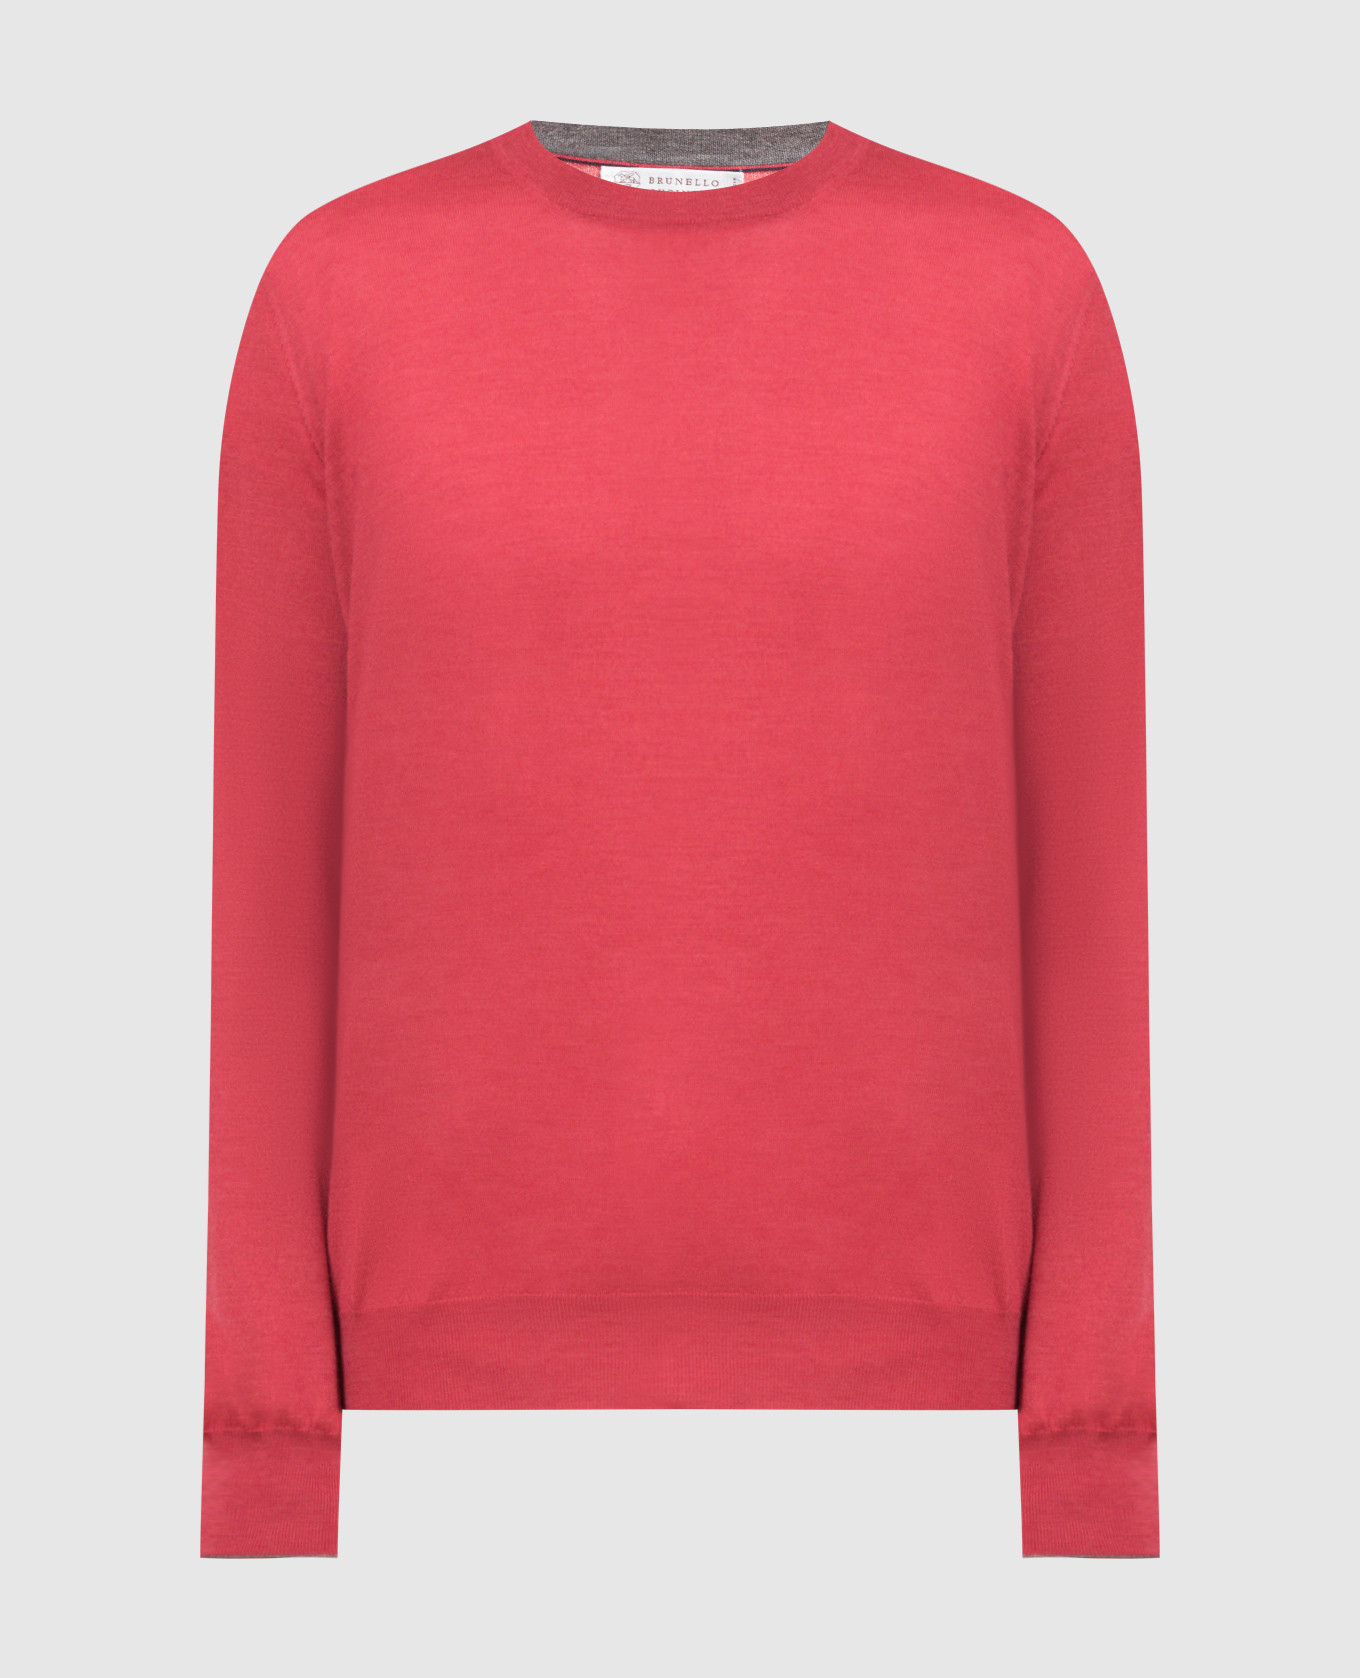 Coral wool and cashmere jumper